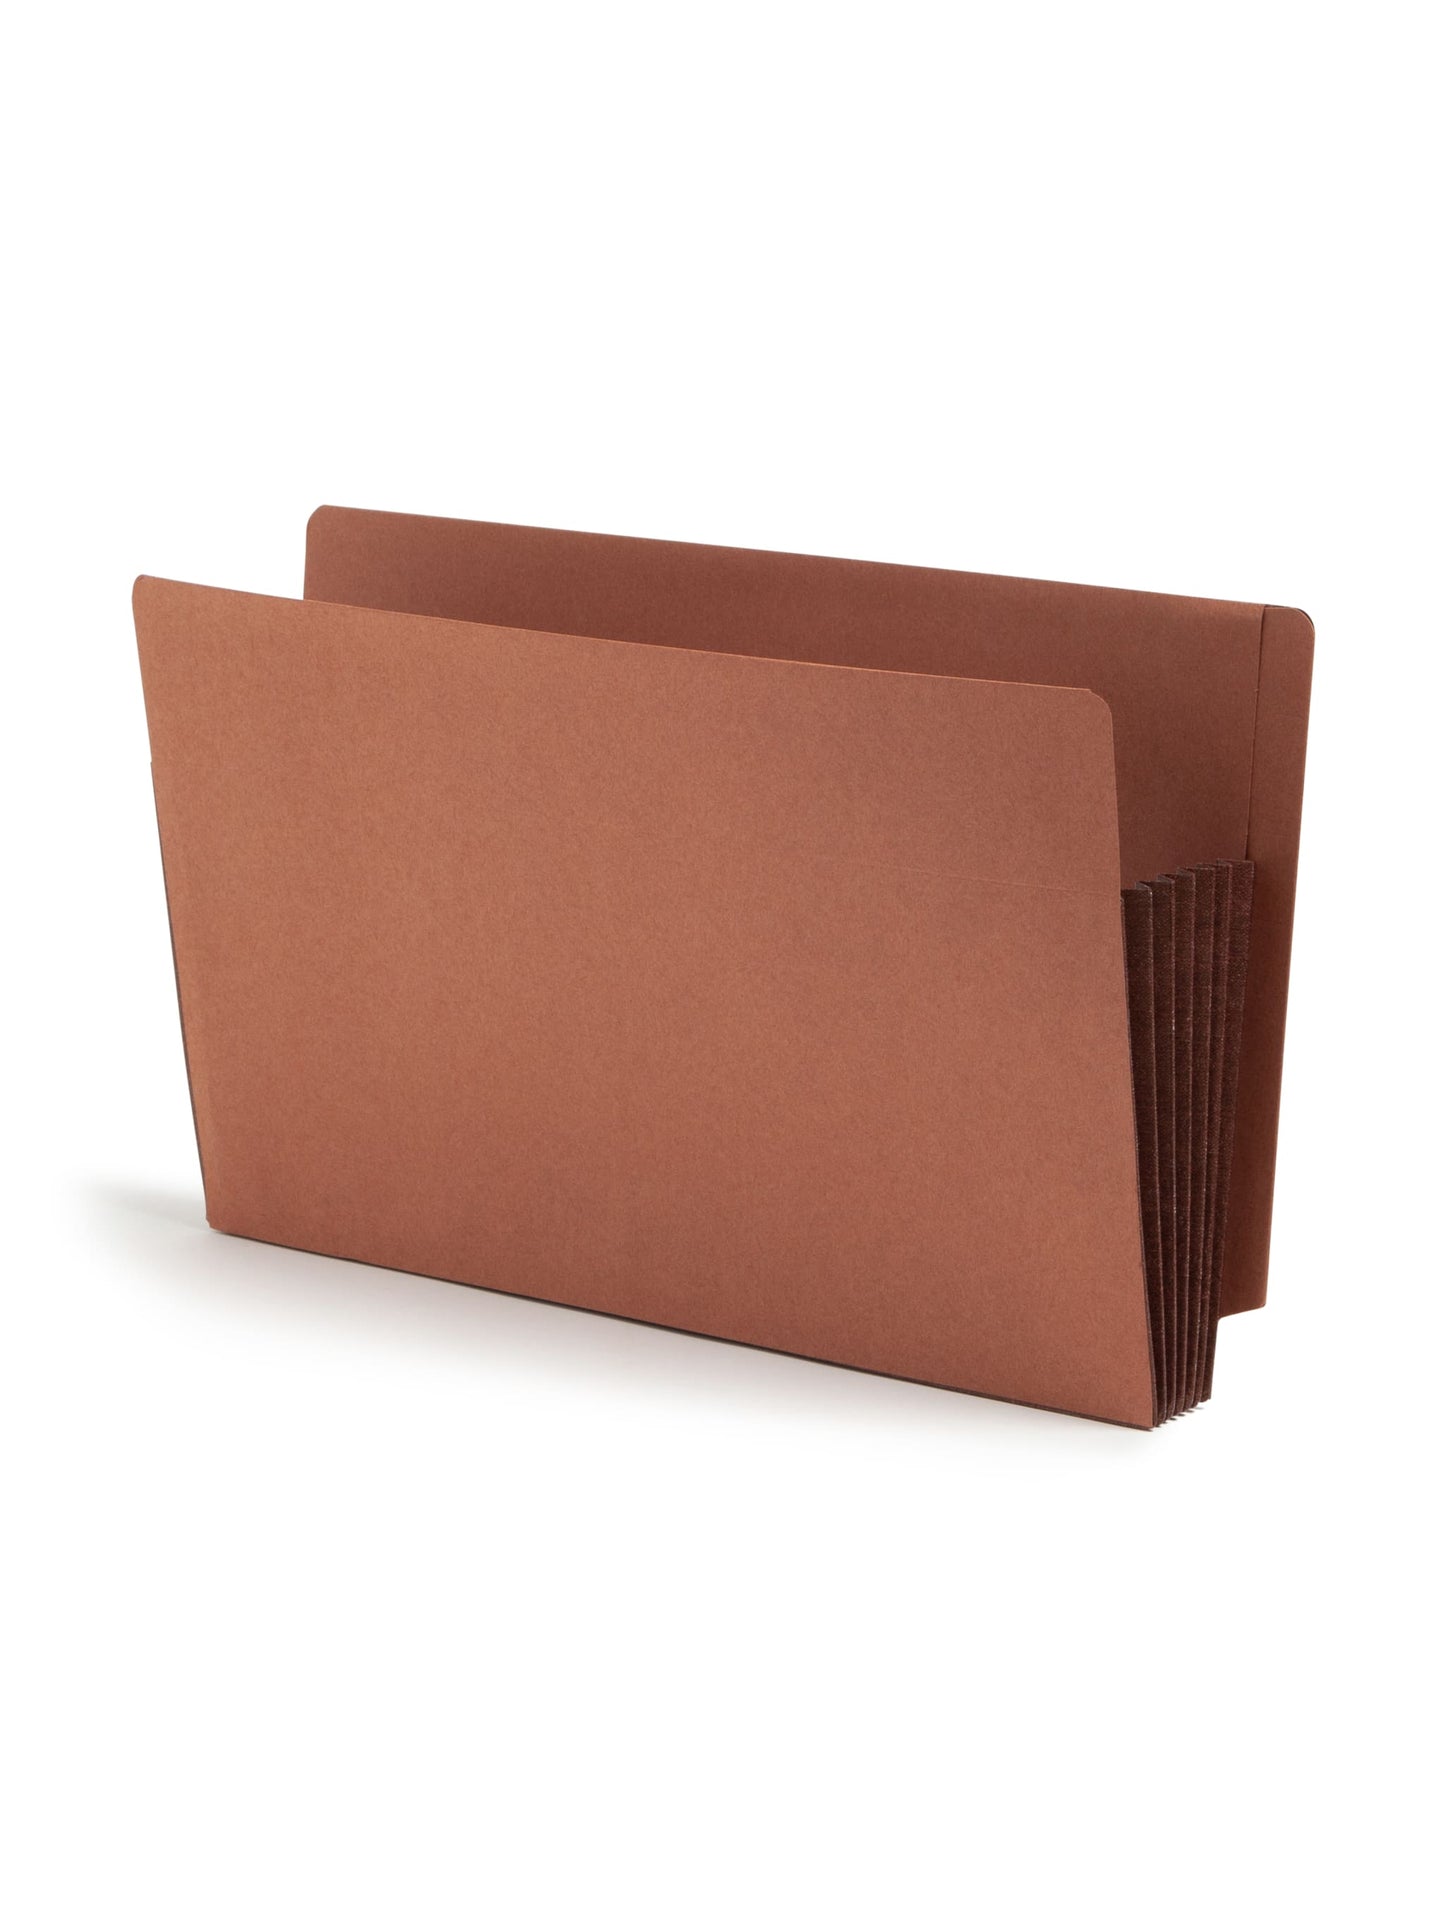 Reinforced End Tab File Pockets, Straight-Cut Tab, 5-1/4 inch Expansion, Dark Brown Color, Extra Wide Legal Size, Set of 0, 30086486746916